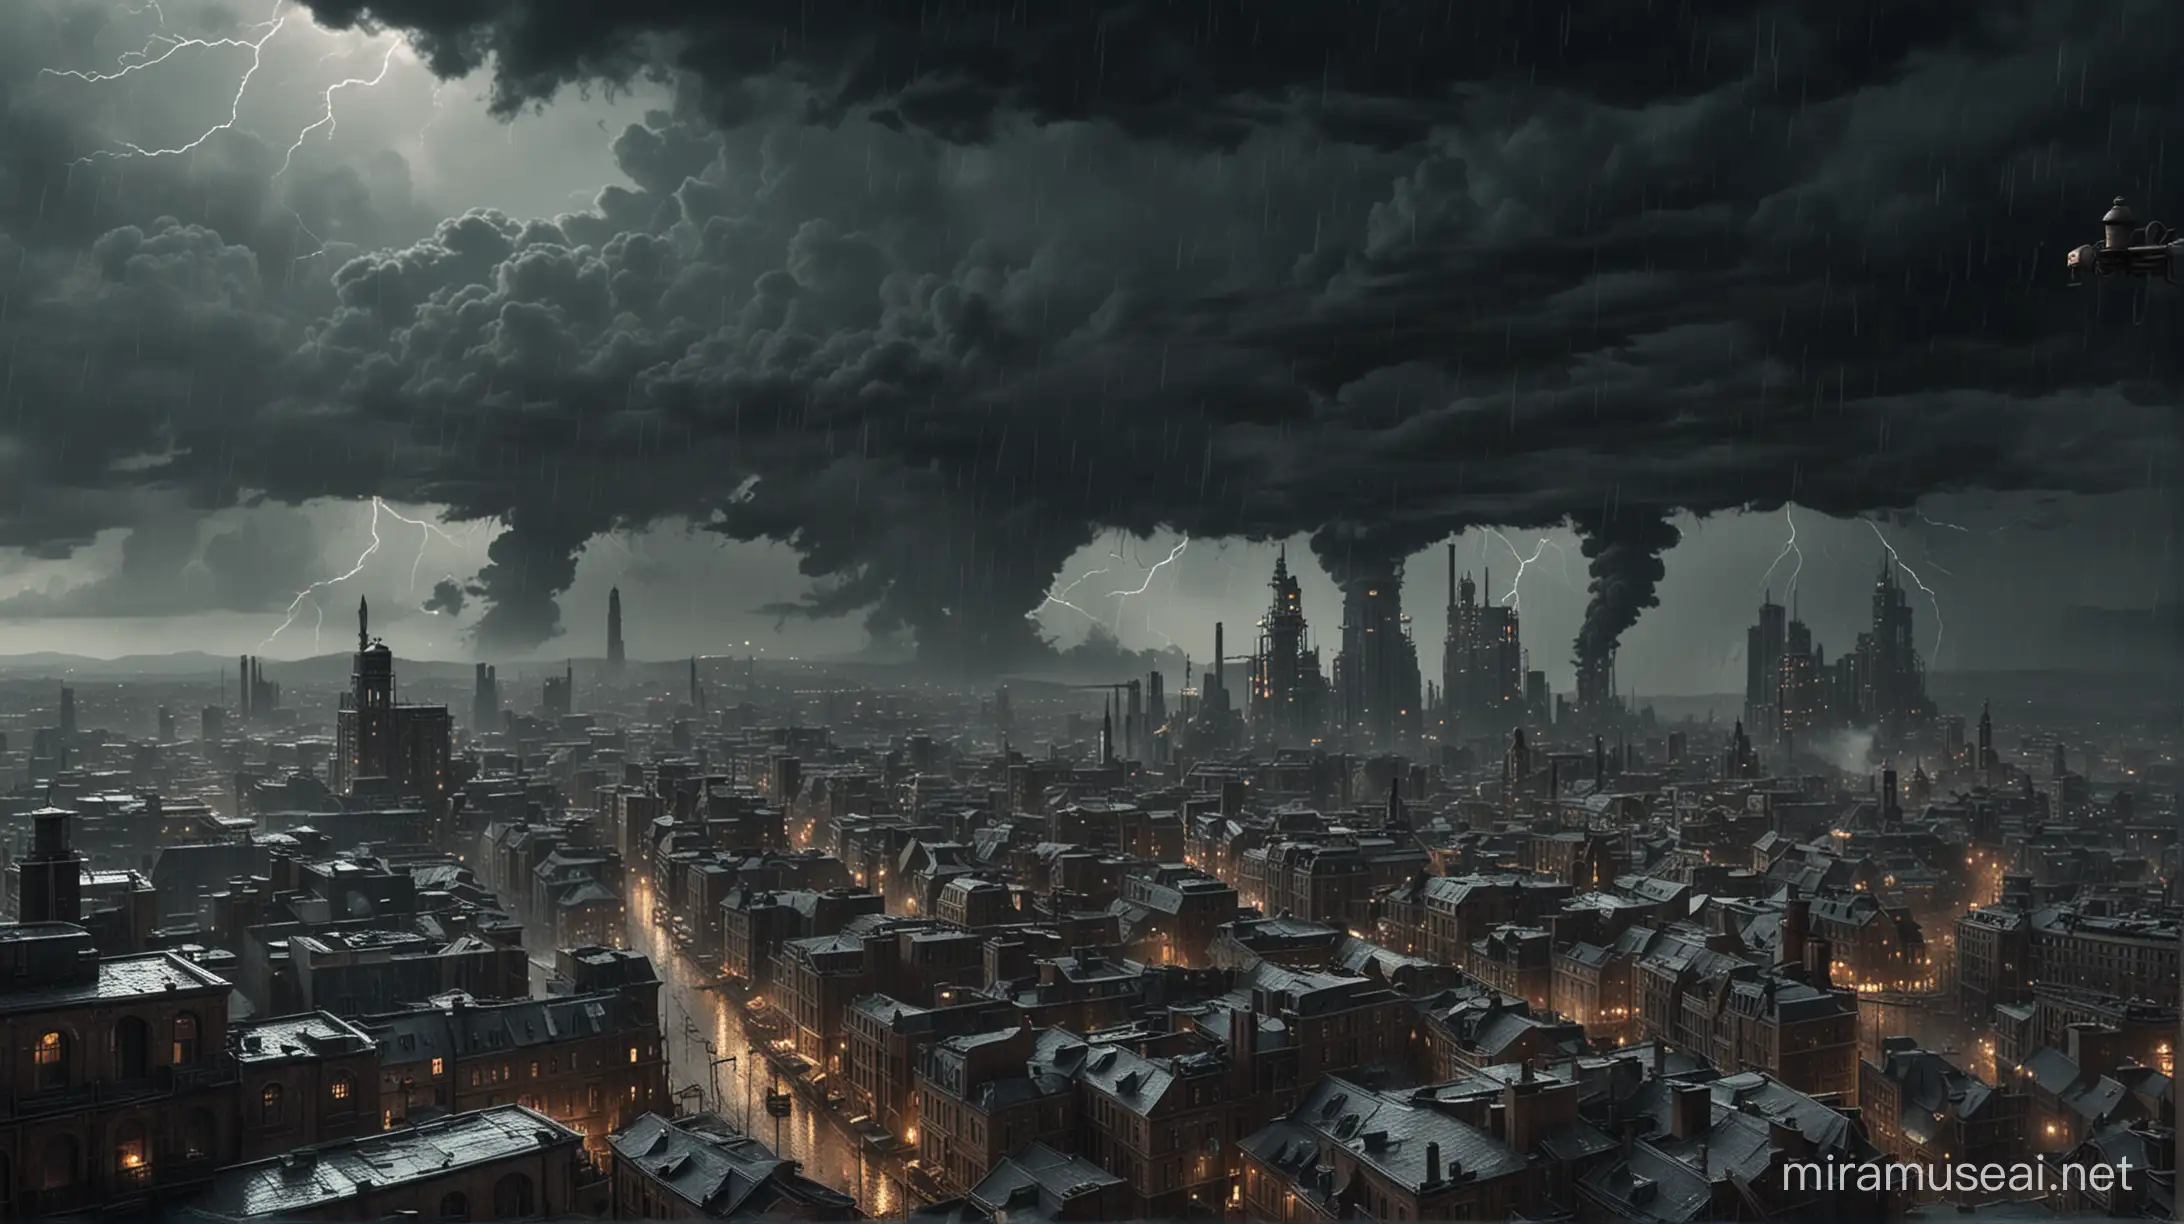 the great storm over a steampunk city. lighting, hard rain and wind, completely dark. distant view from a high building.